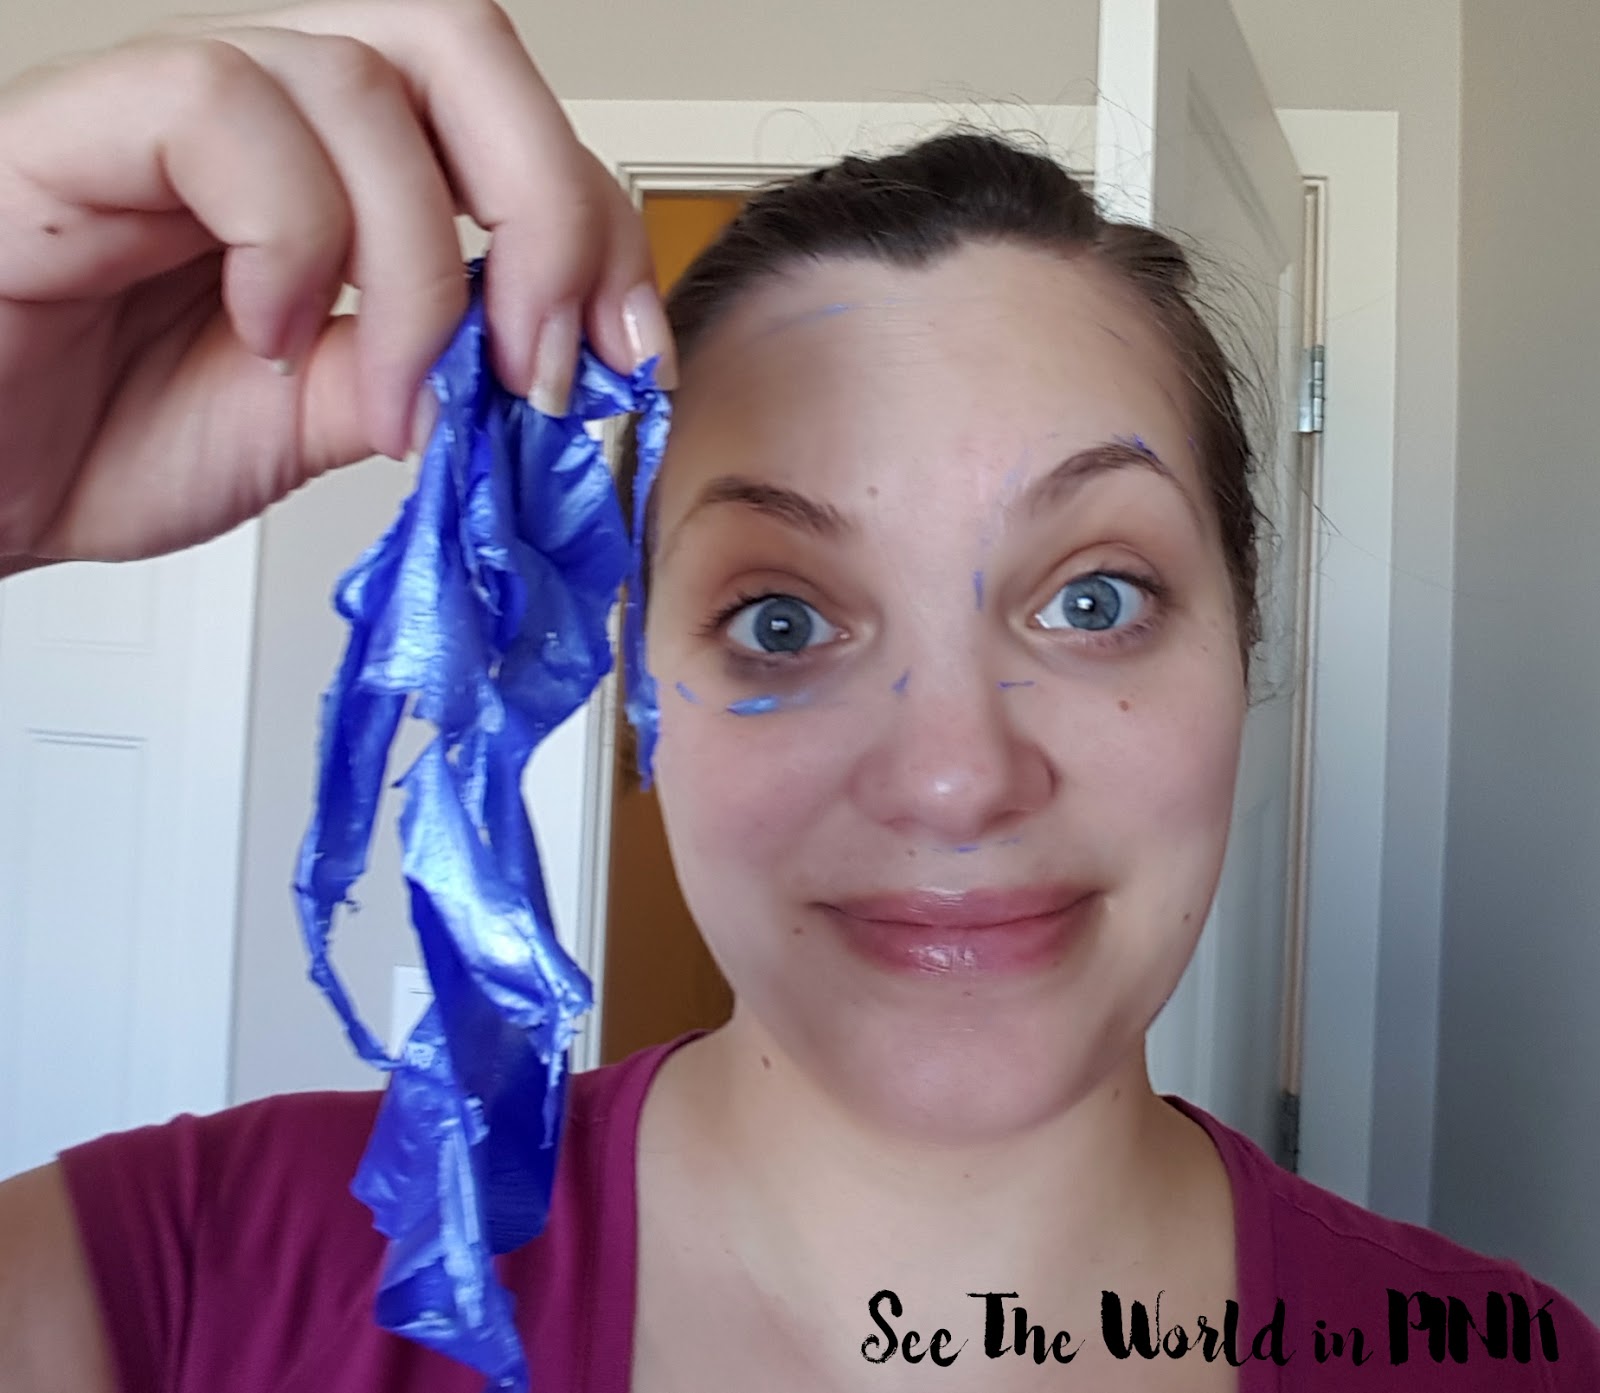 Mask Wednesday - Glamglow Gravitymud Firming Treatment "Sonic Blue Collectible Edition" Review